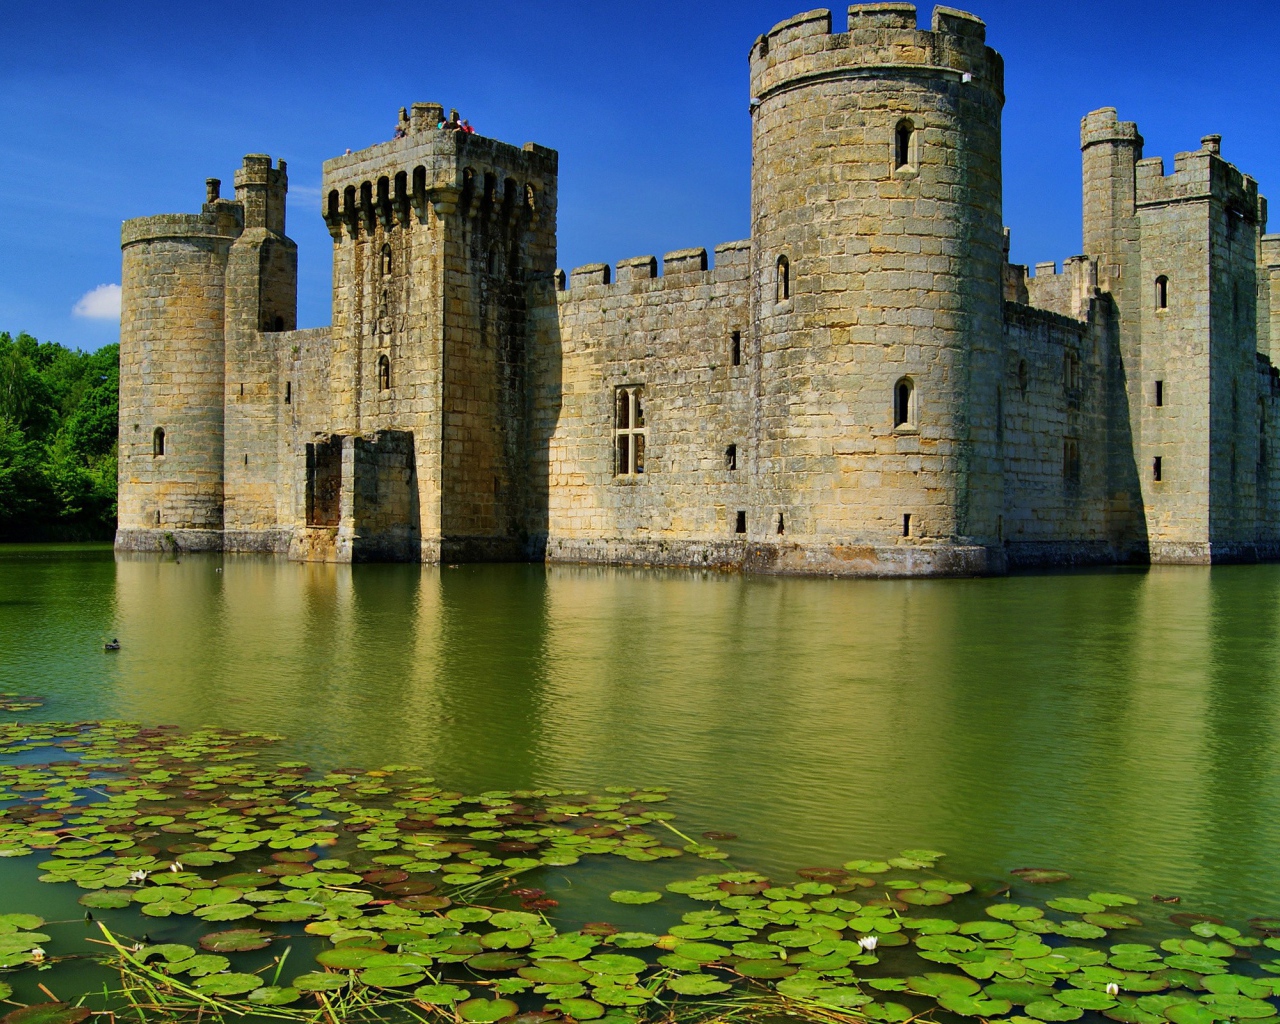 An ancient castle on the water Bodiam, England 